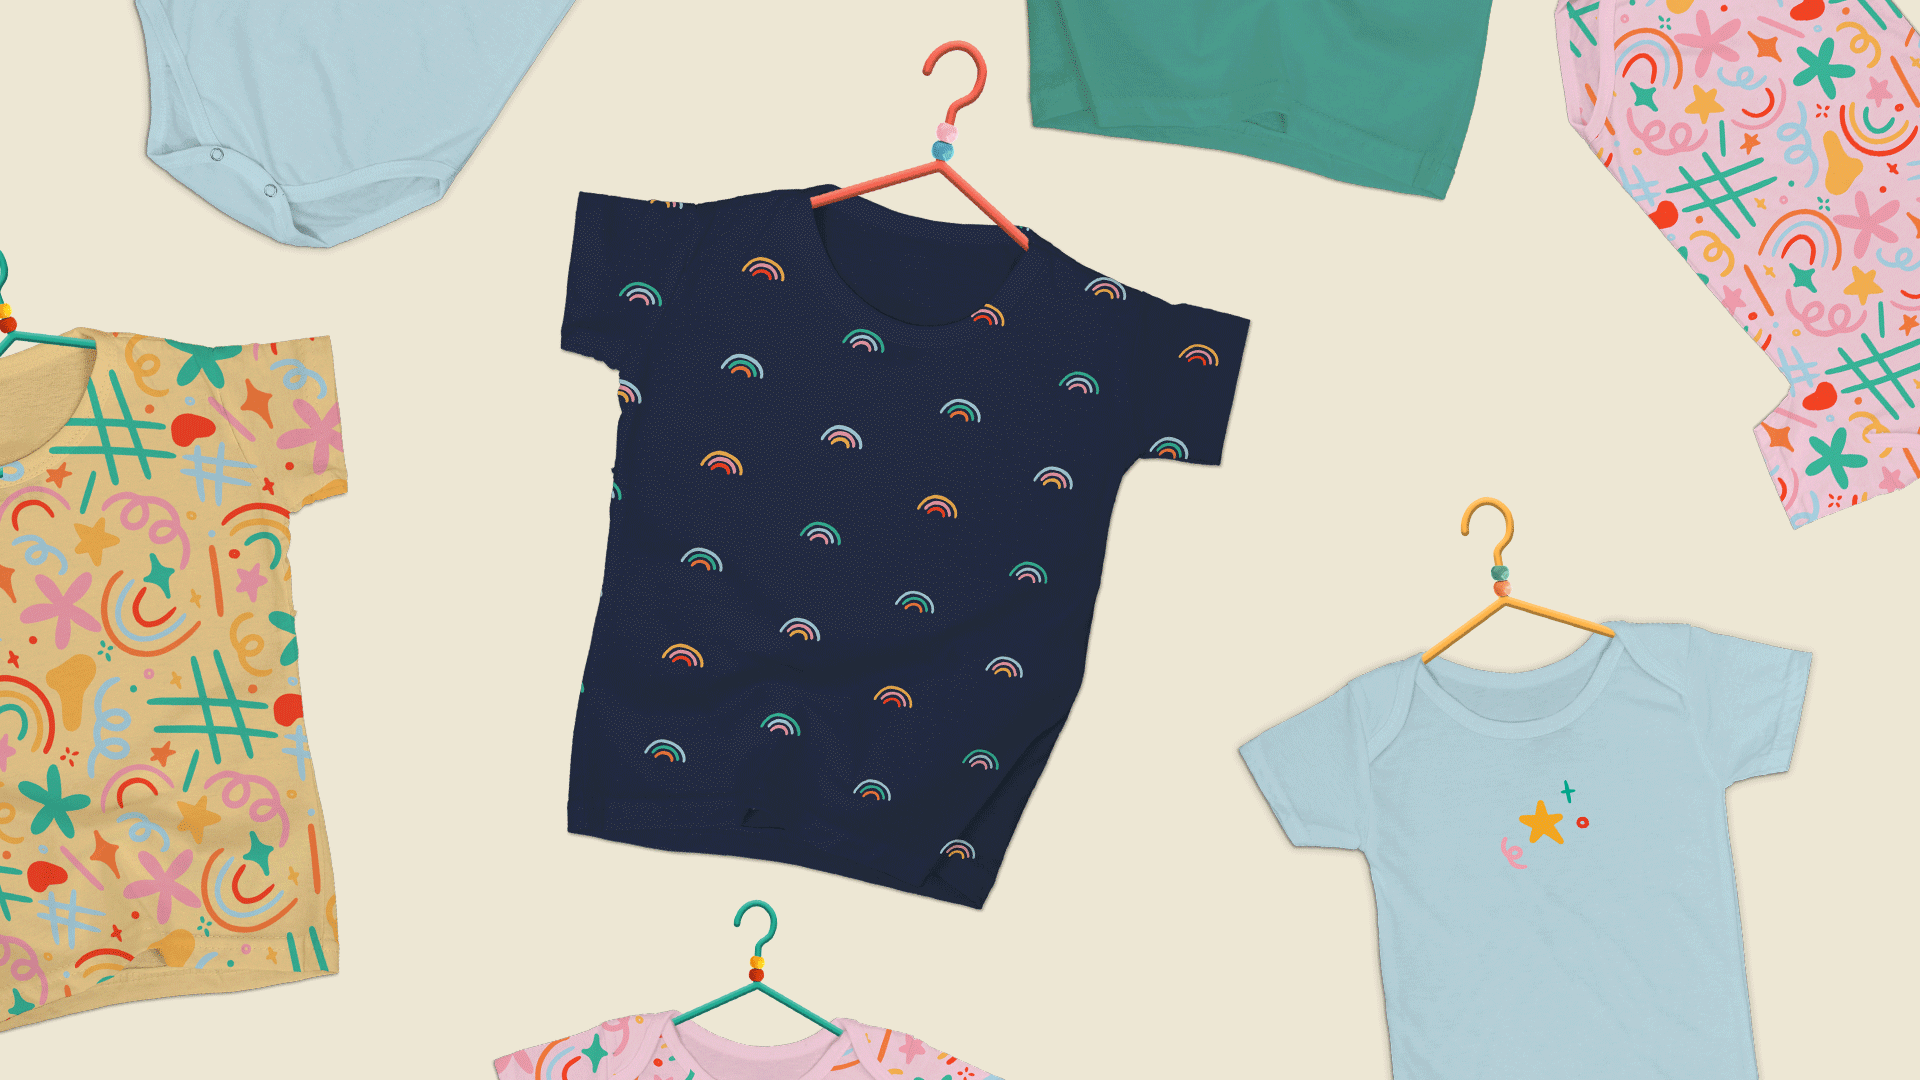 Children’s t-shirts and onesies randomly scattered on the page.